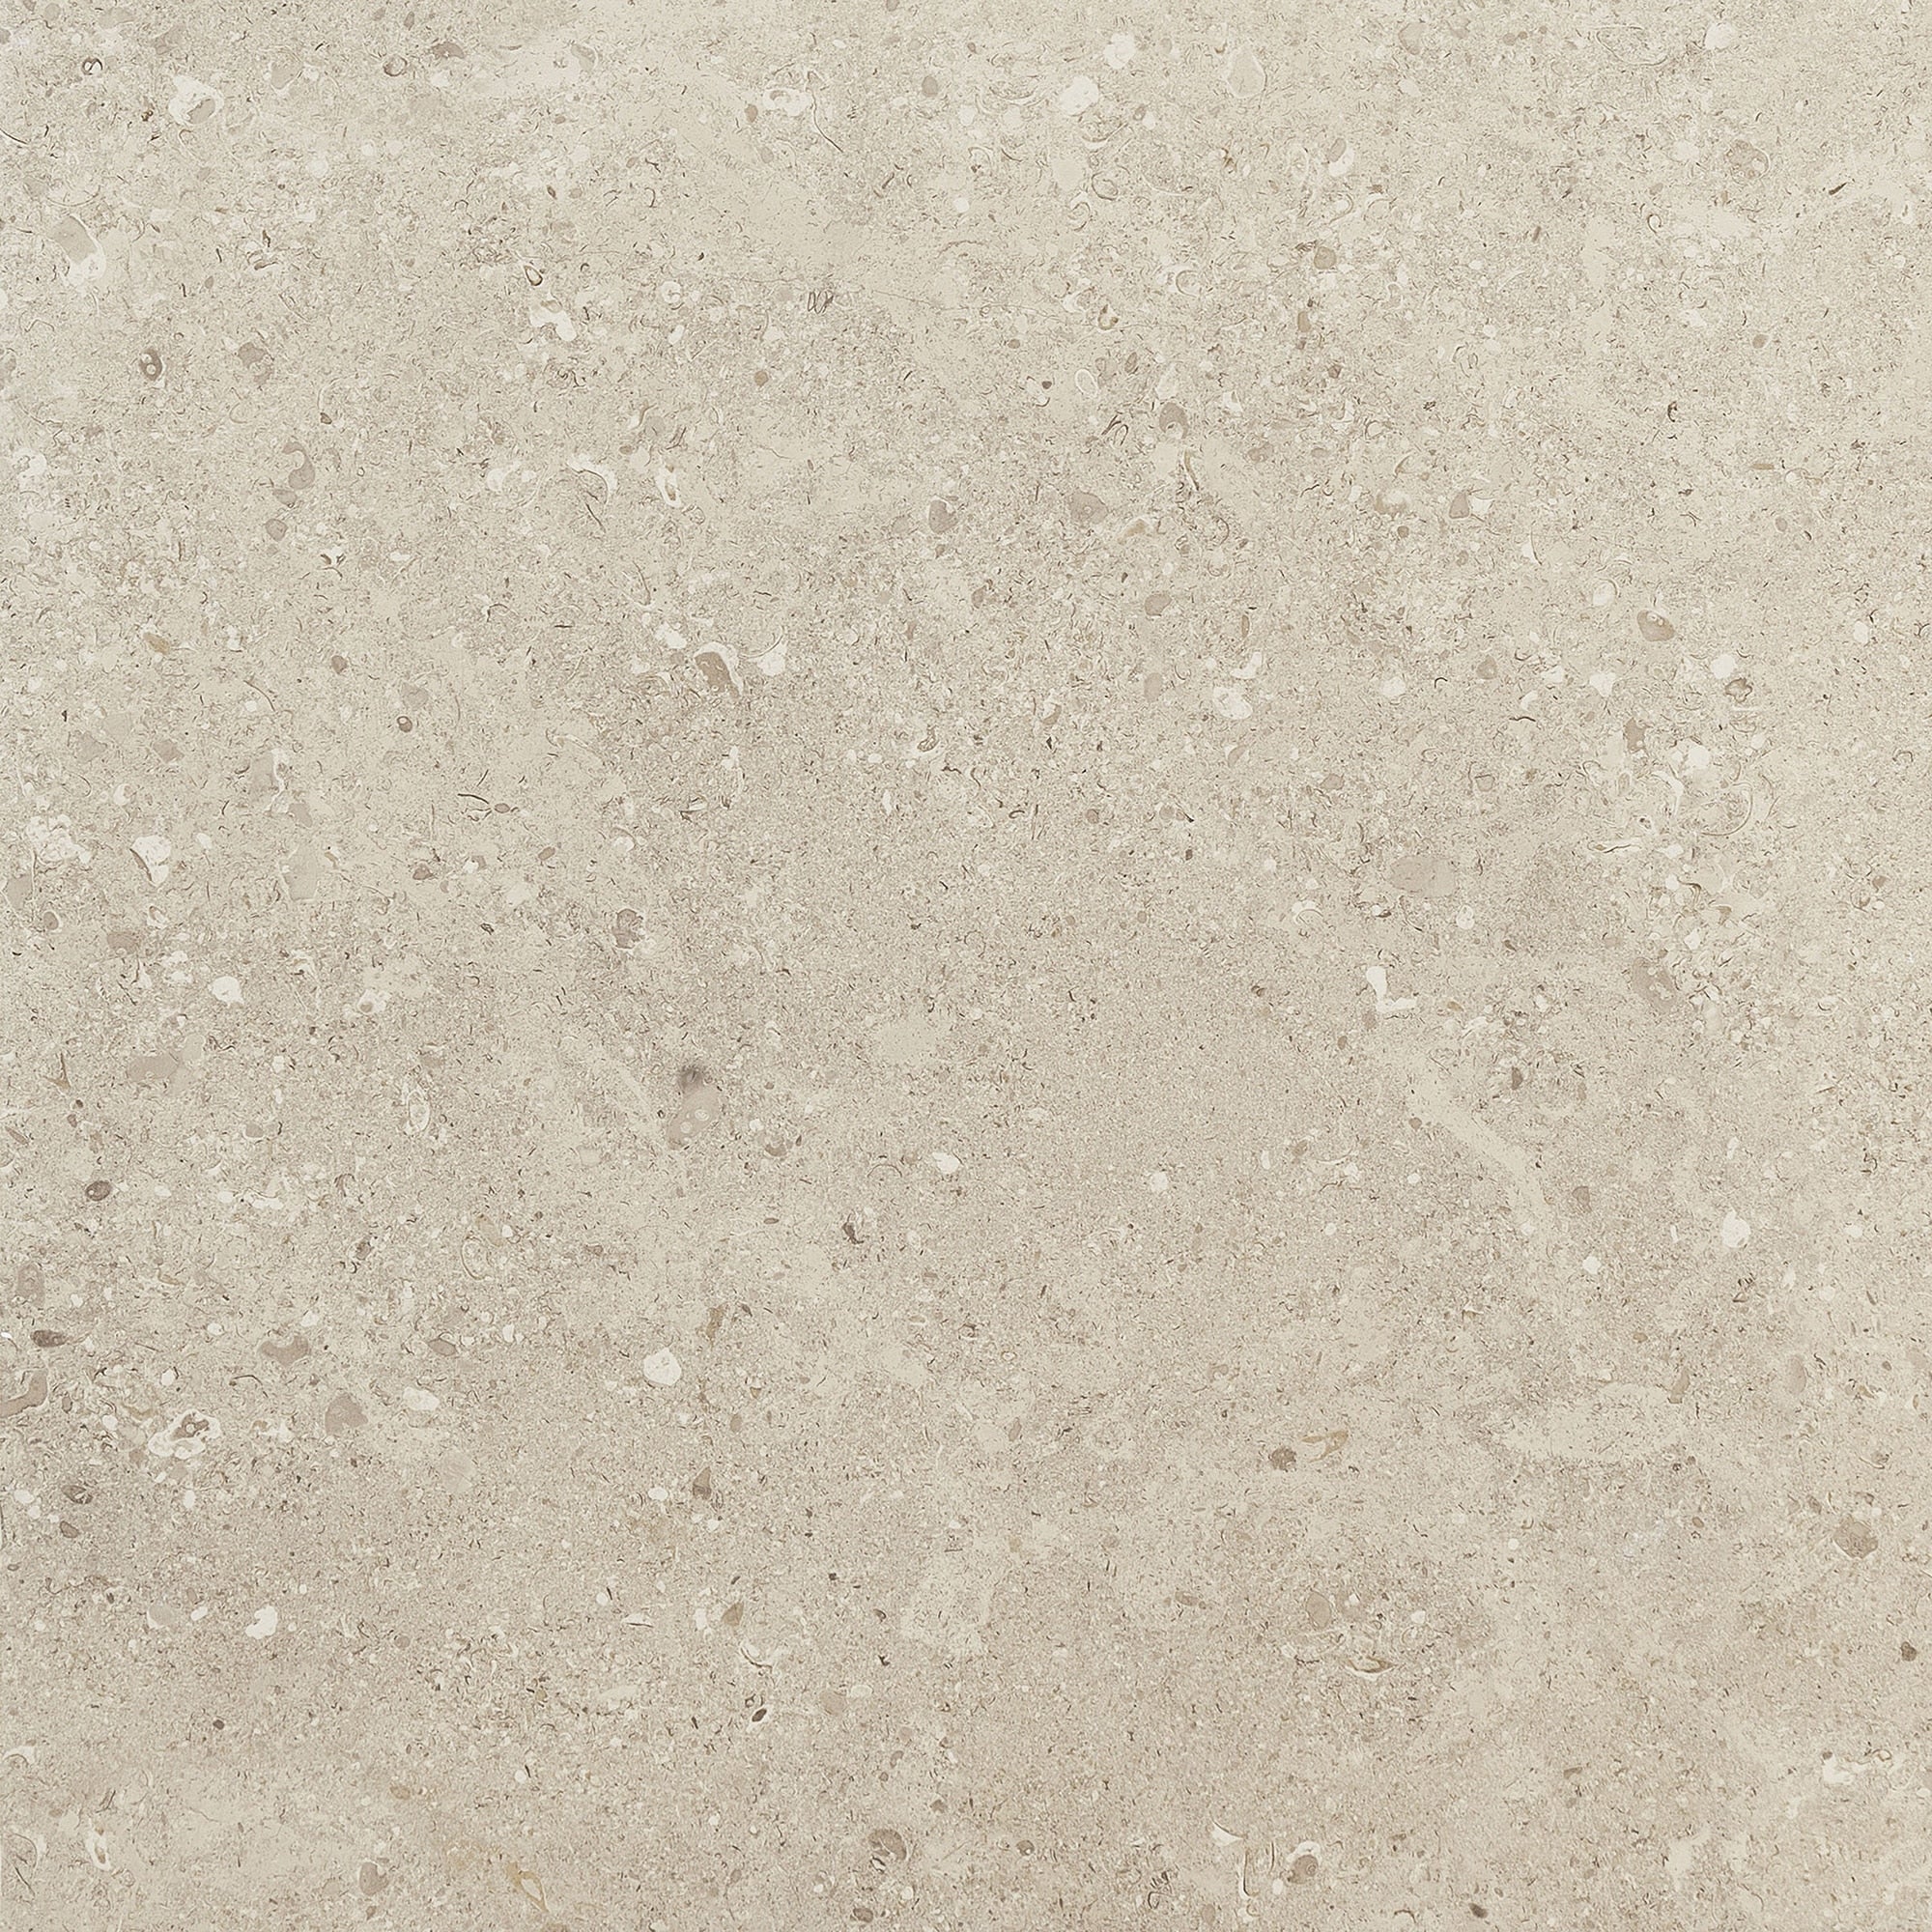 Daltile - Dignitary 24 in. x 24 in. Textured Porcelain Paver - Notable Beige